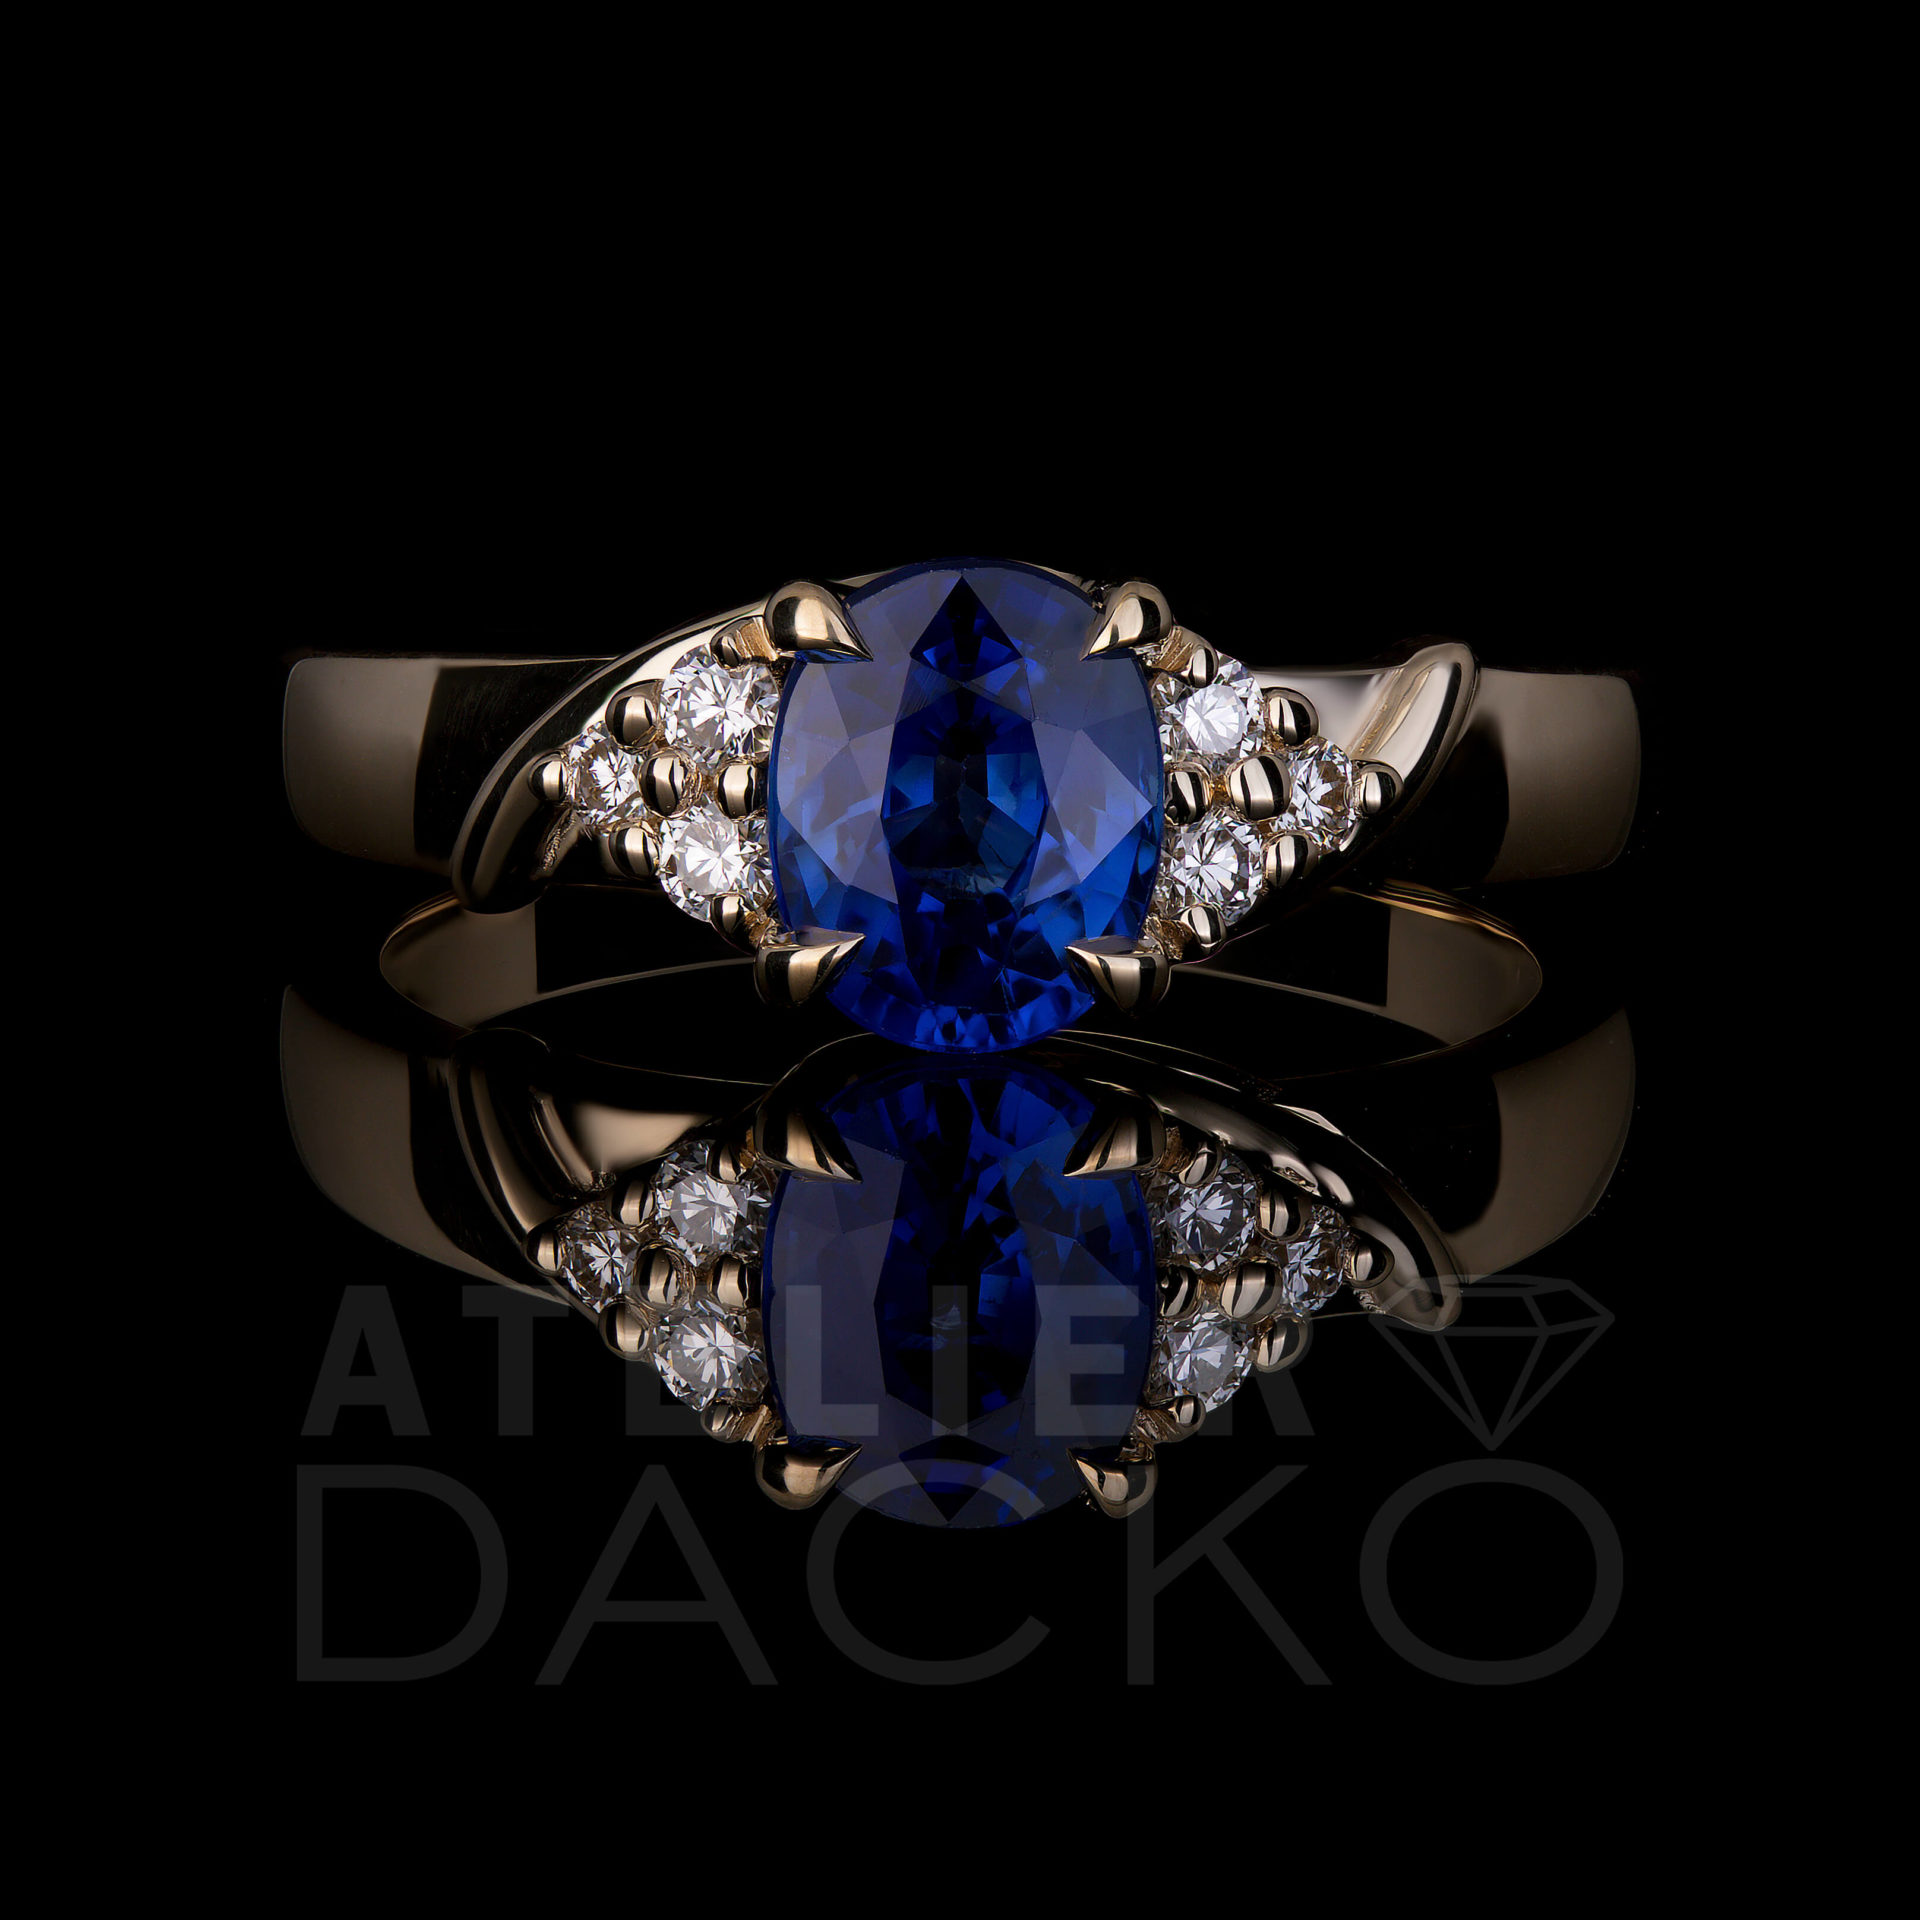 1.22 CT Ceylon blue oval sapphire center stone set in 14k yellow gold mount with 4 talon claws. Accented with 3 round diamonds on each shoulder set with round prongs.